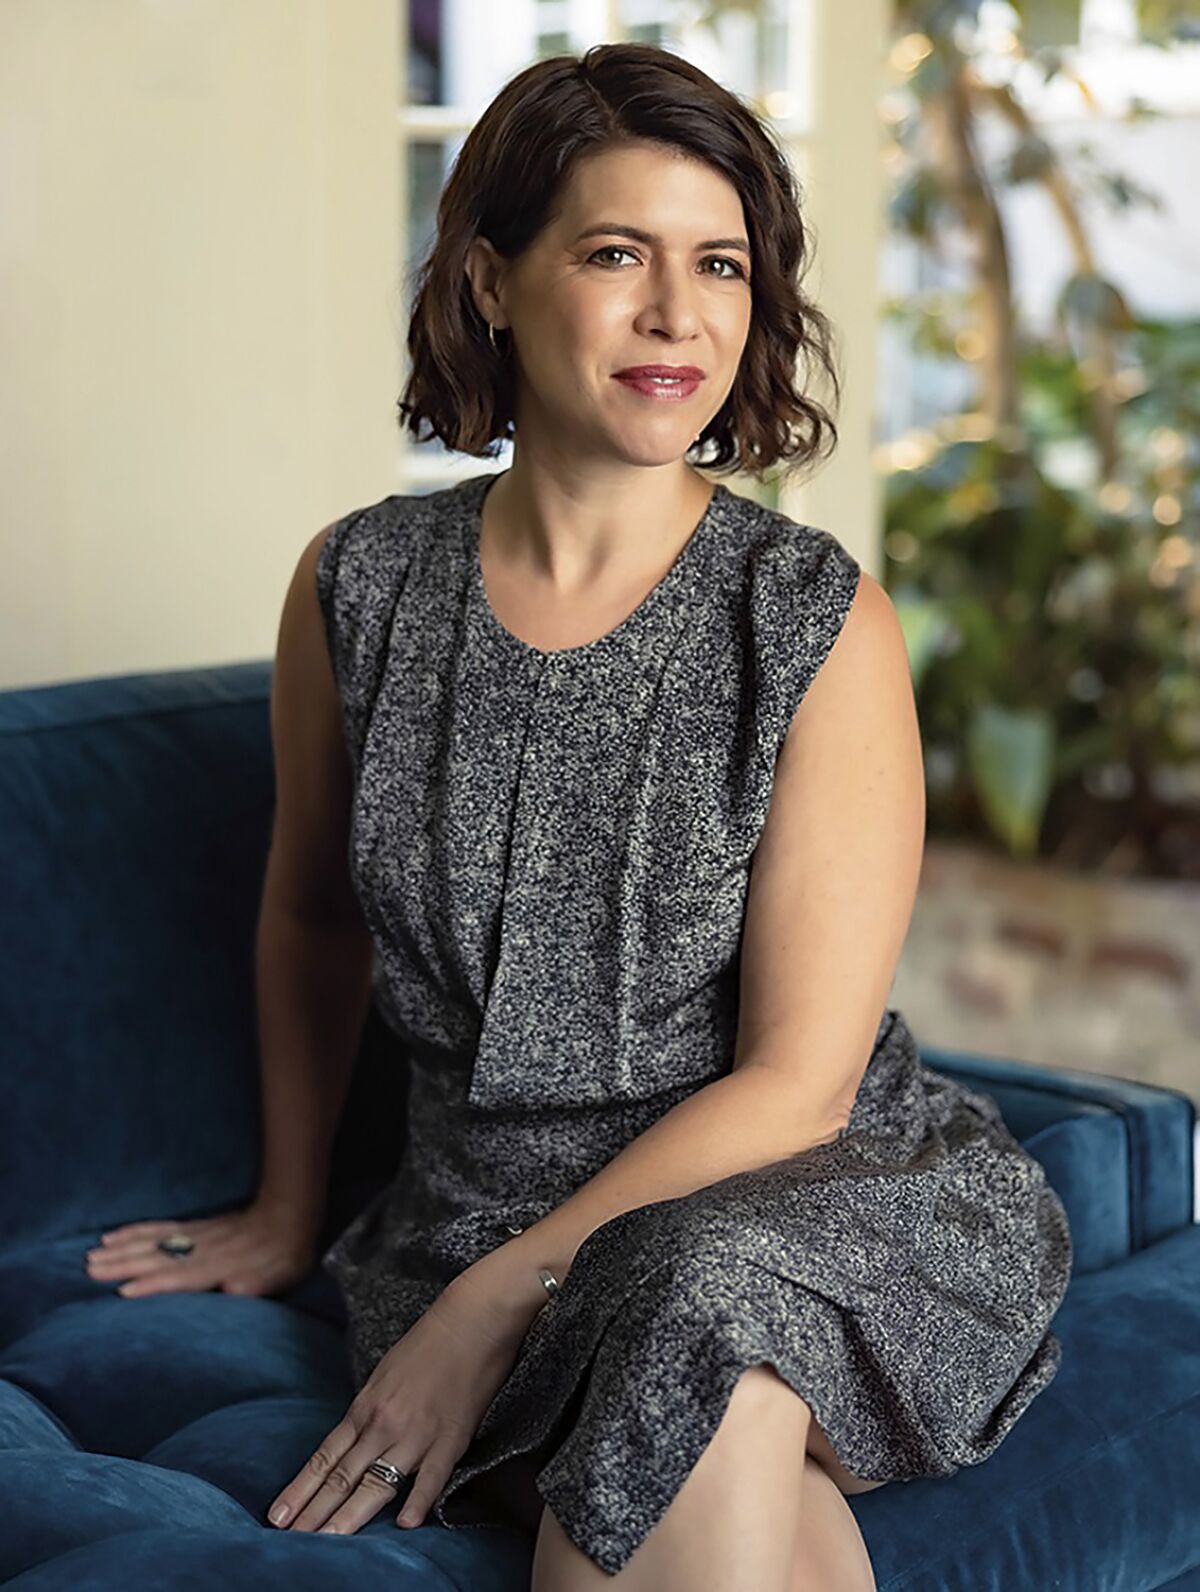 A woman in a dress poses on a couch for a headshot 